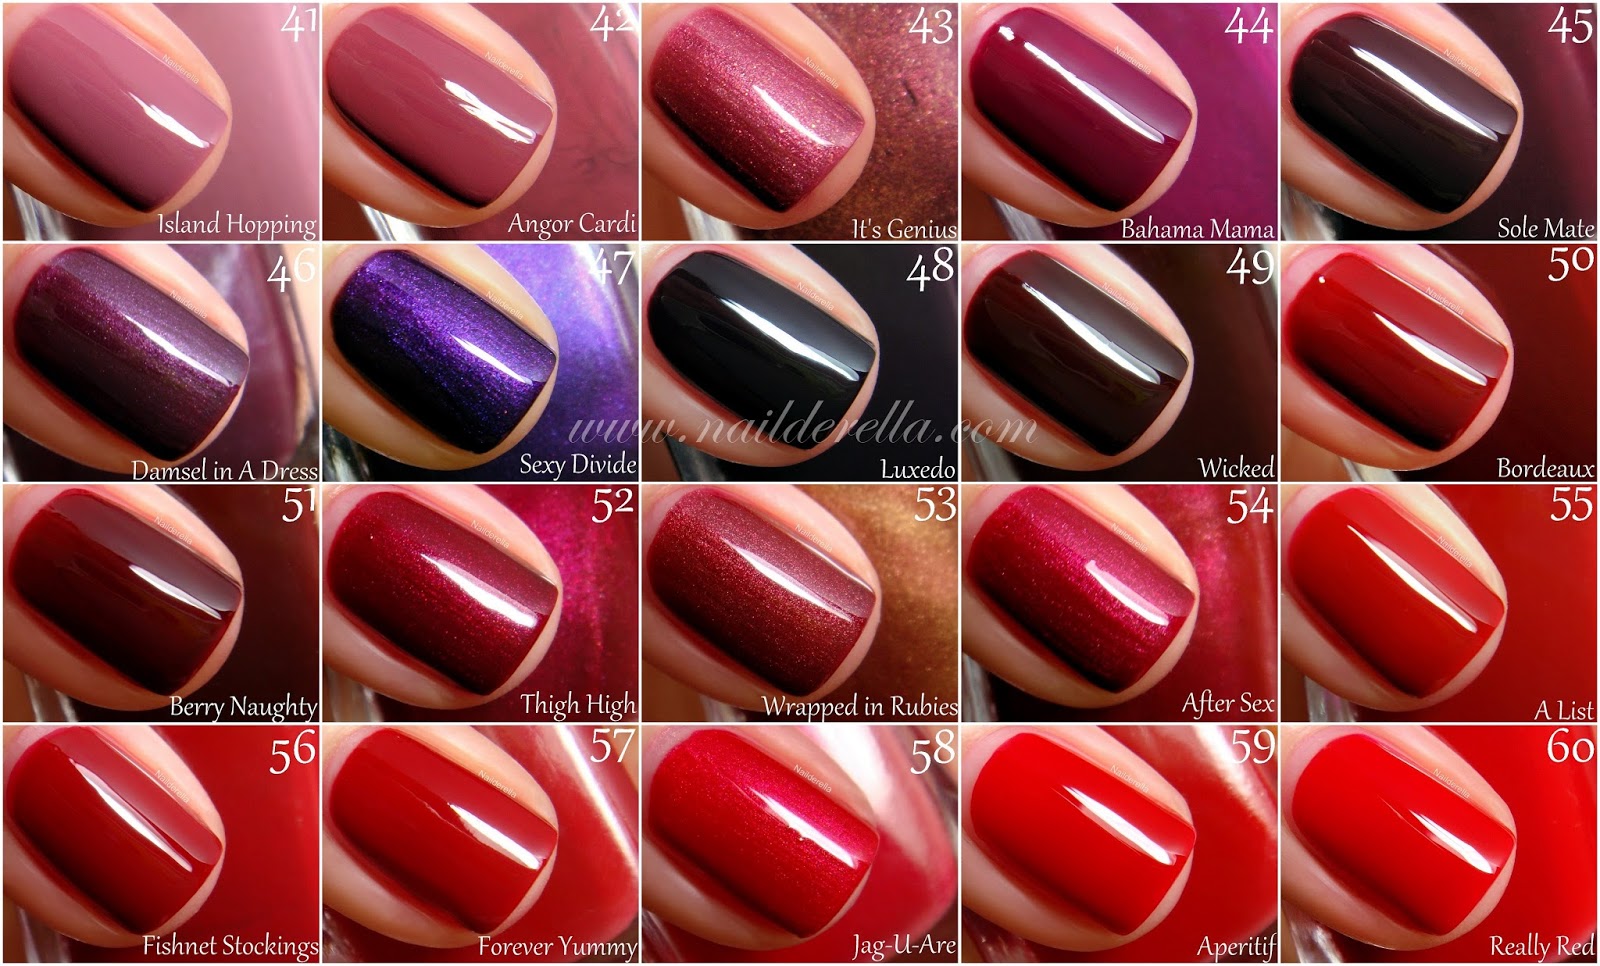 2. Essie Nail Polish Color Swatch Book - wide 3